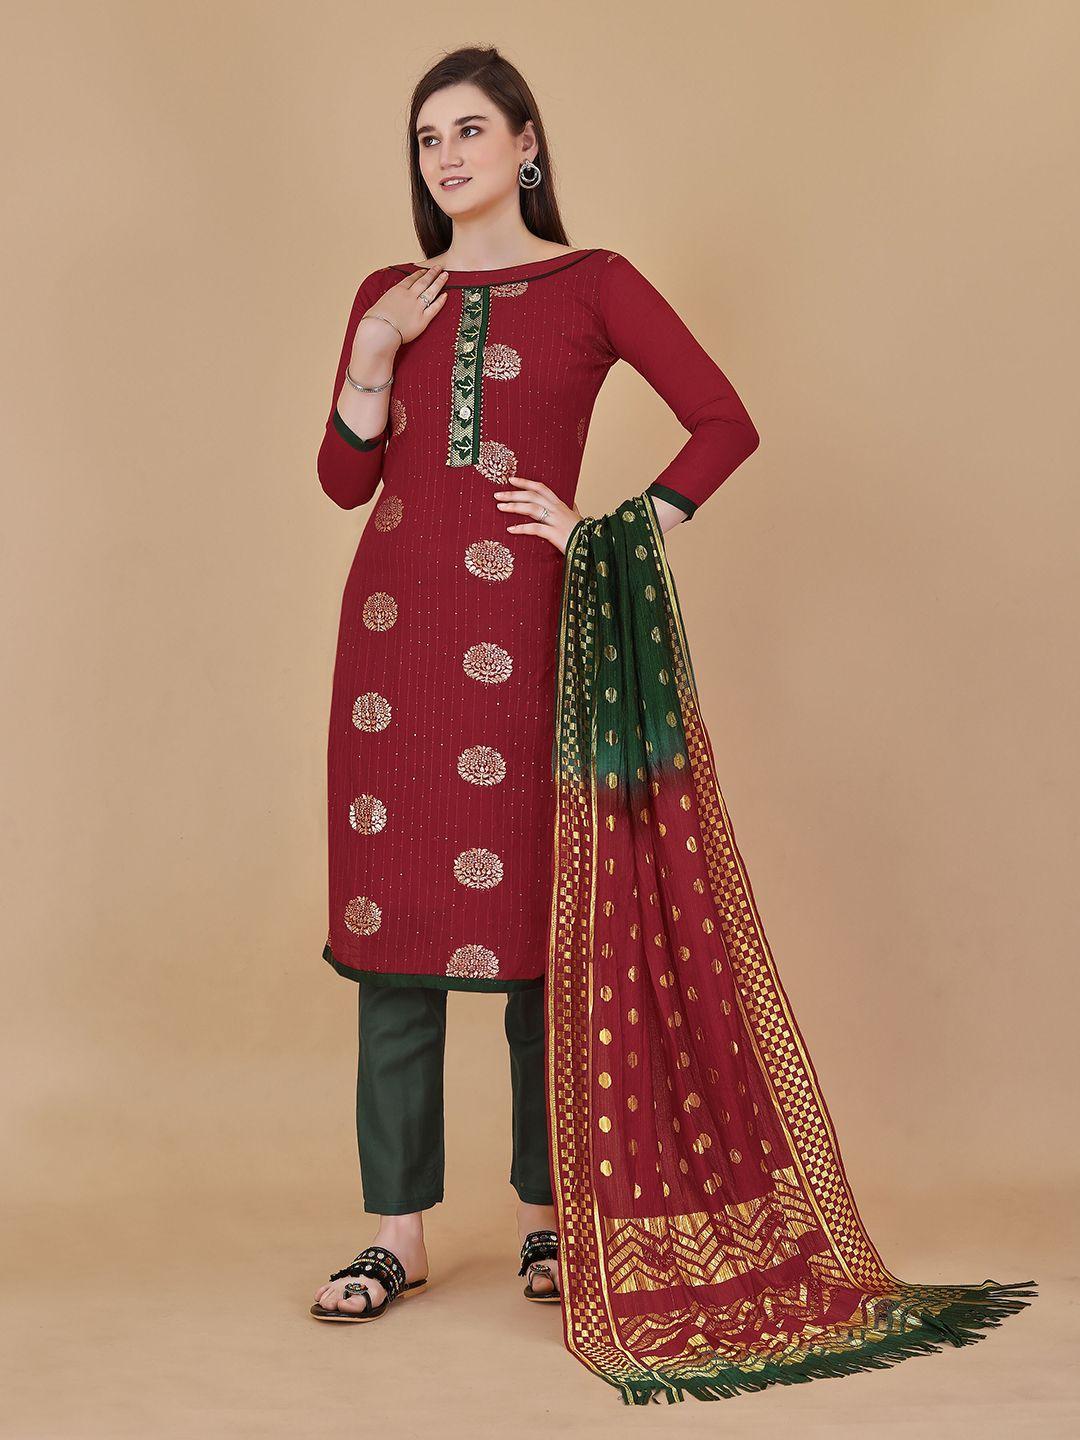 manvaa-red-unstitched-dress-material